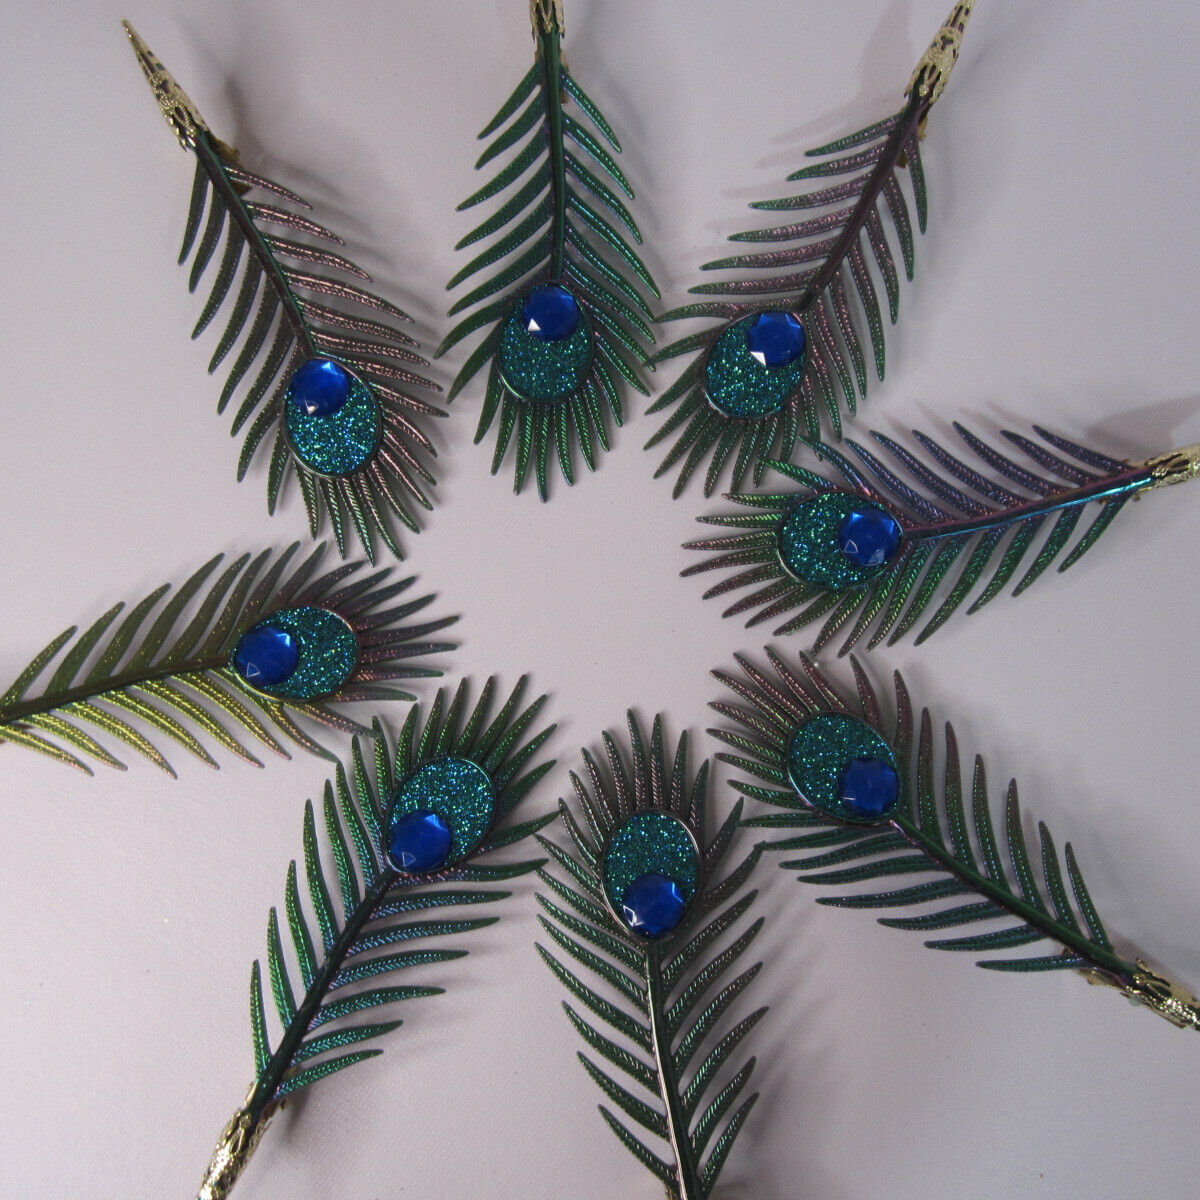 Plastic Peacock Feather Christmas Tree Ornaments Clip-On Decor Glitter Set of 8